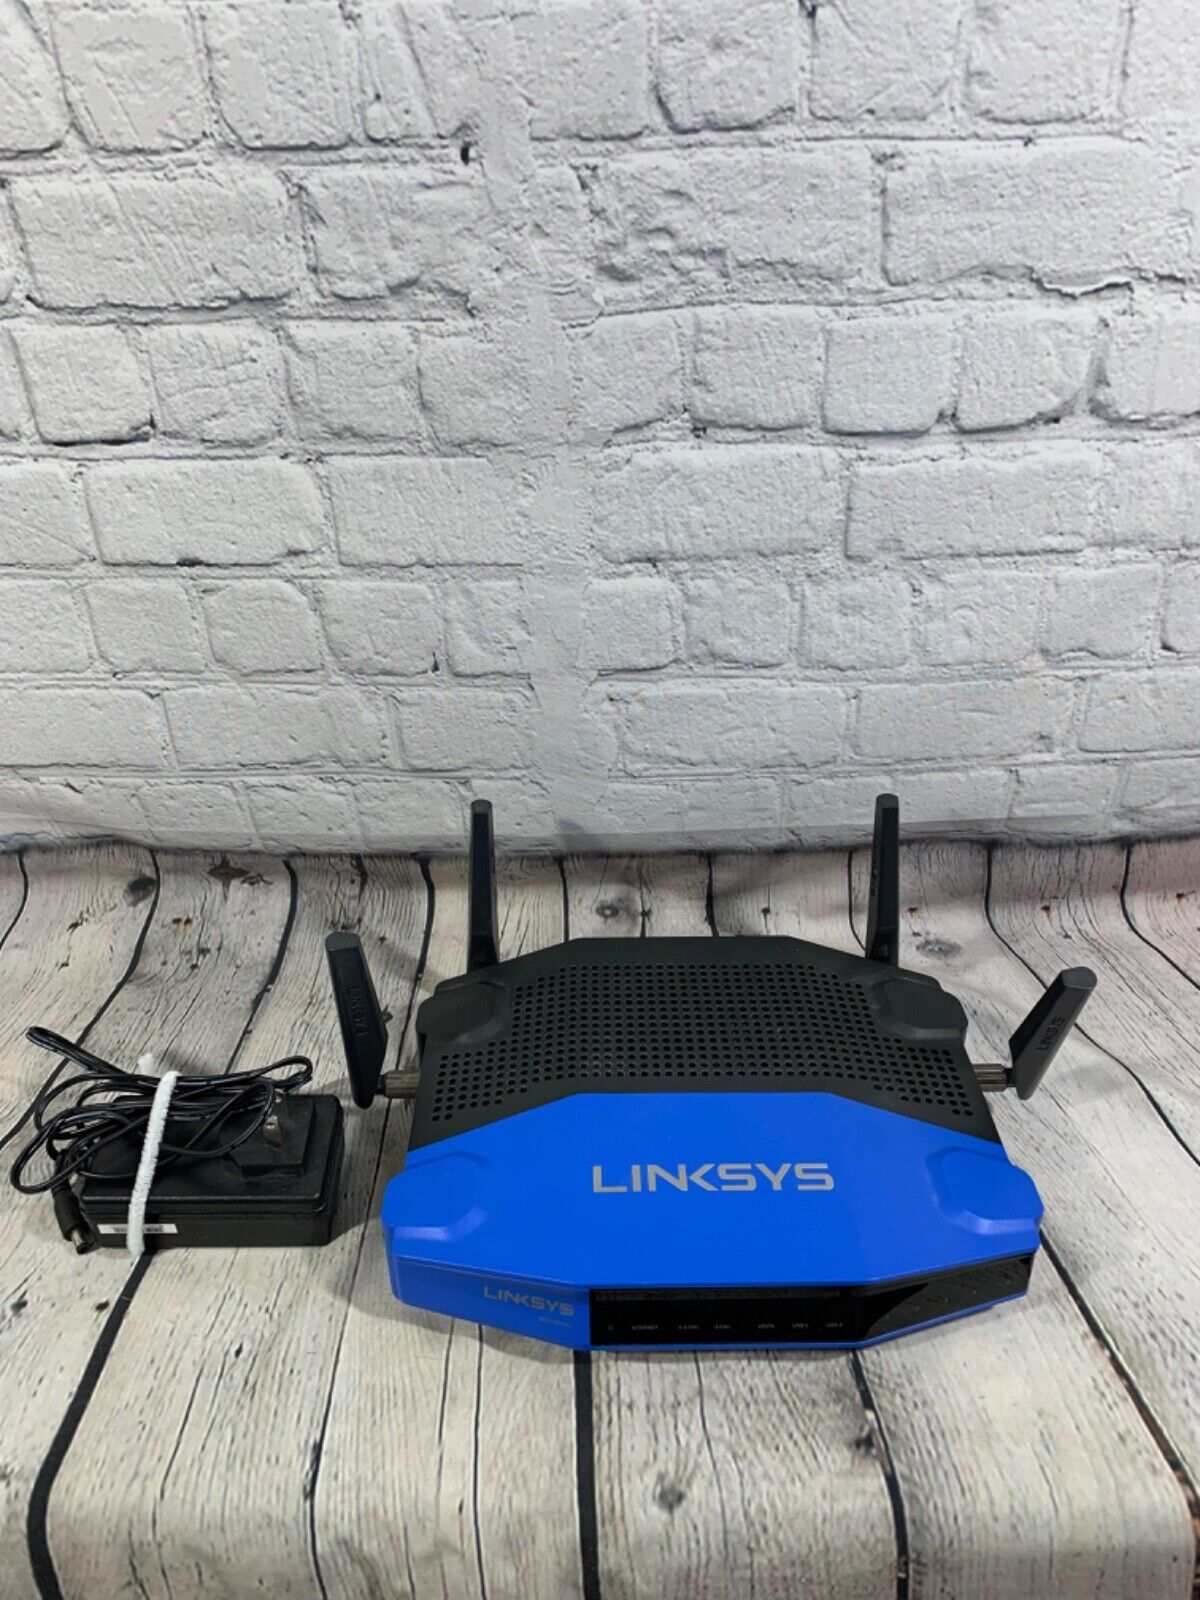 Vintage Linksys WRT 1900 AC router ( Not tested)